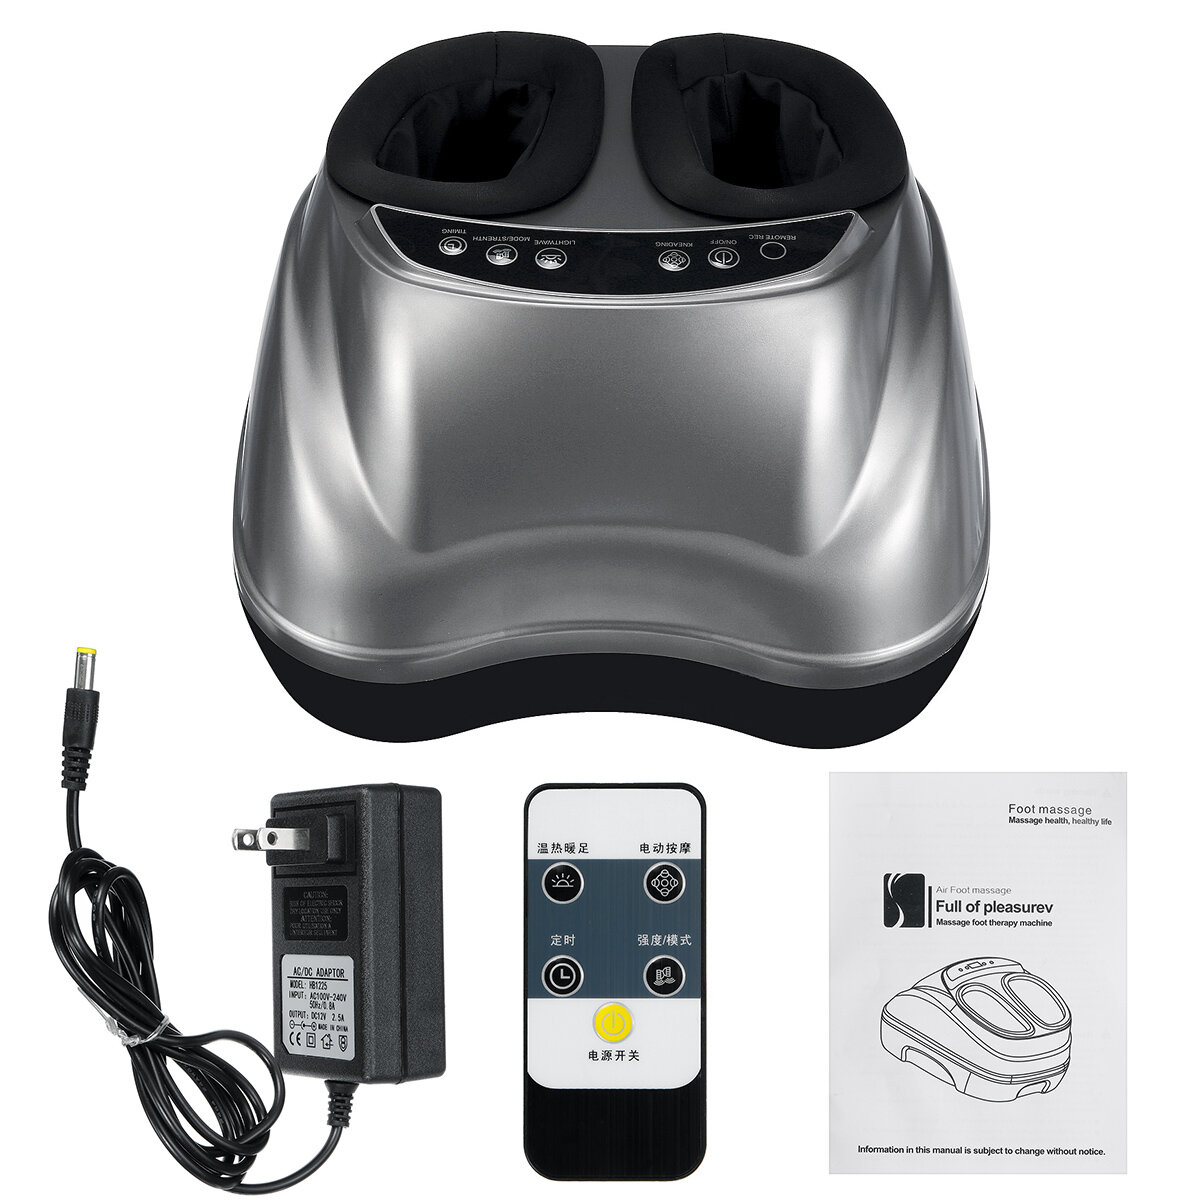 Image of Multifunctional Electric Foot Massage Heating Therapy Muscle Stimulator Massager W/ Remote Control